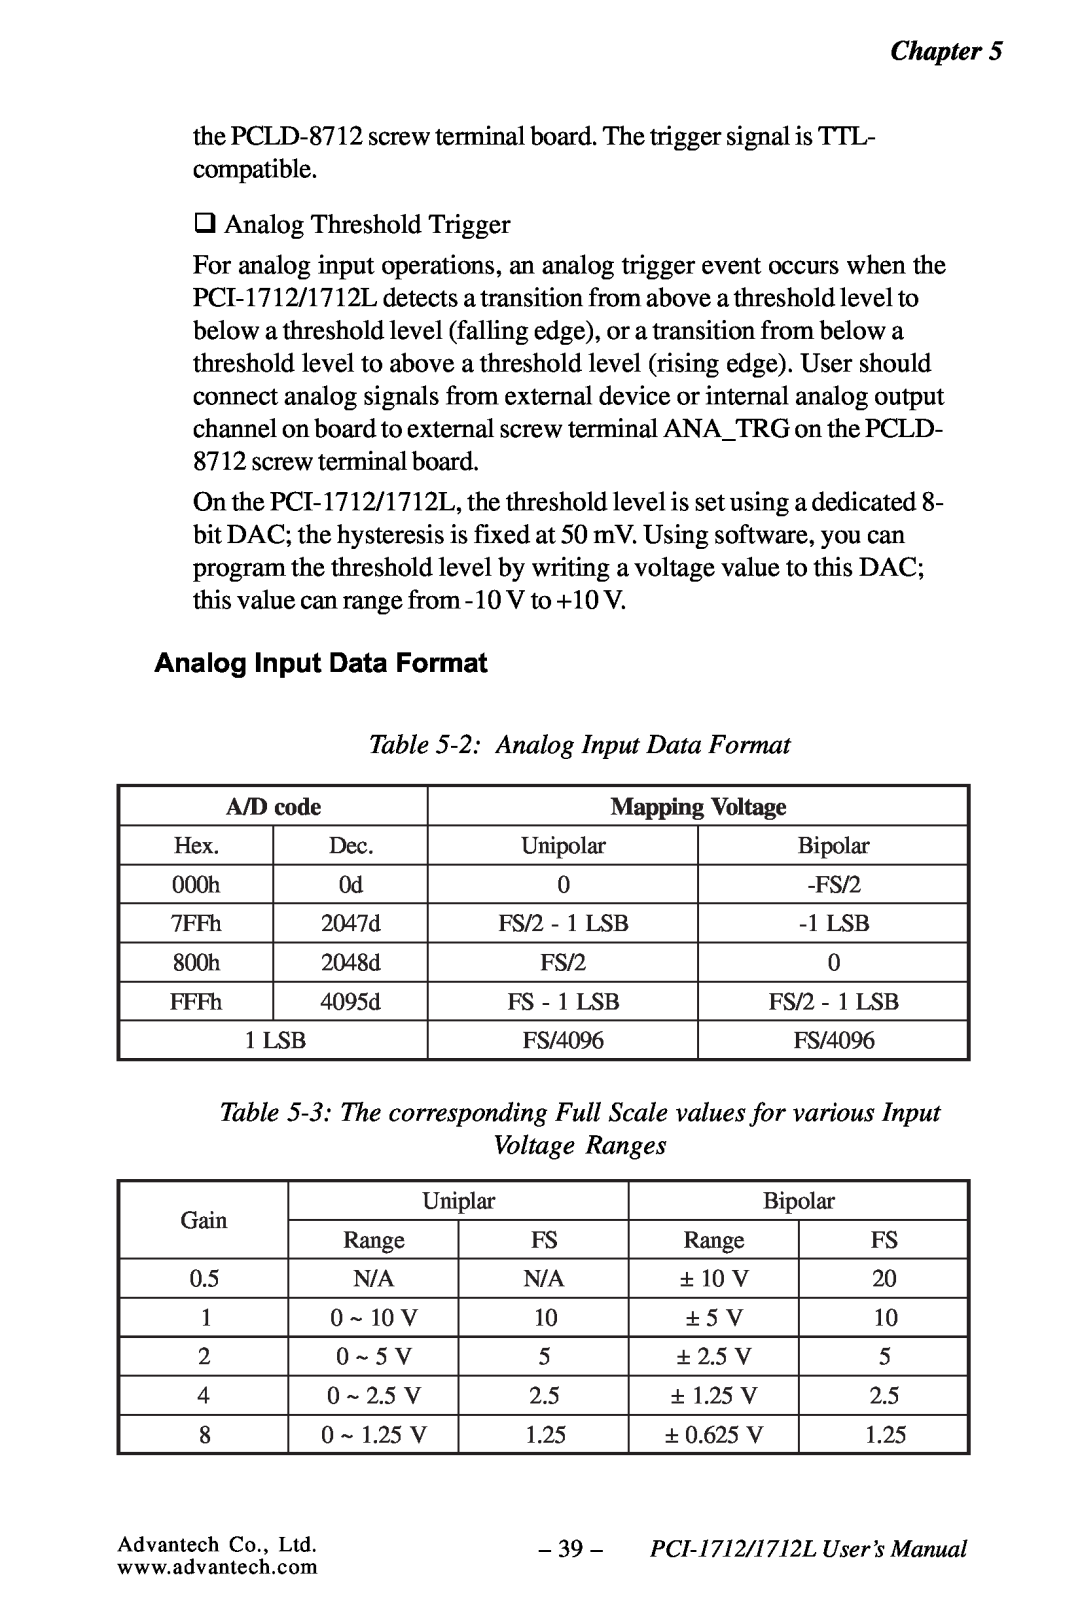 Konica Minolta PCI-1712L user manual 2 Analog Input Data Format, 3 The corresponding Full Scale values for various Input 